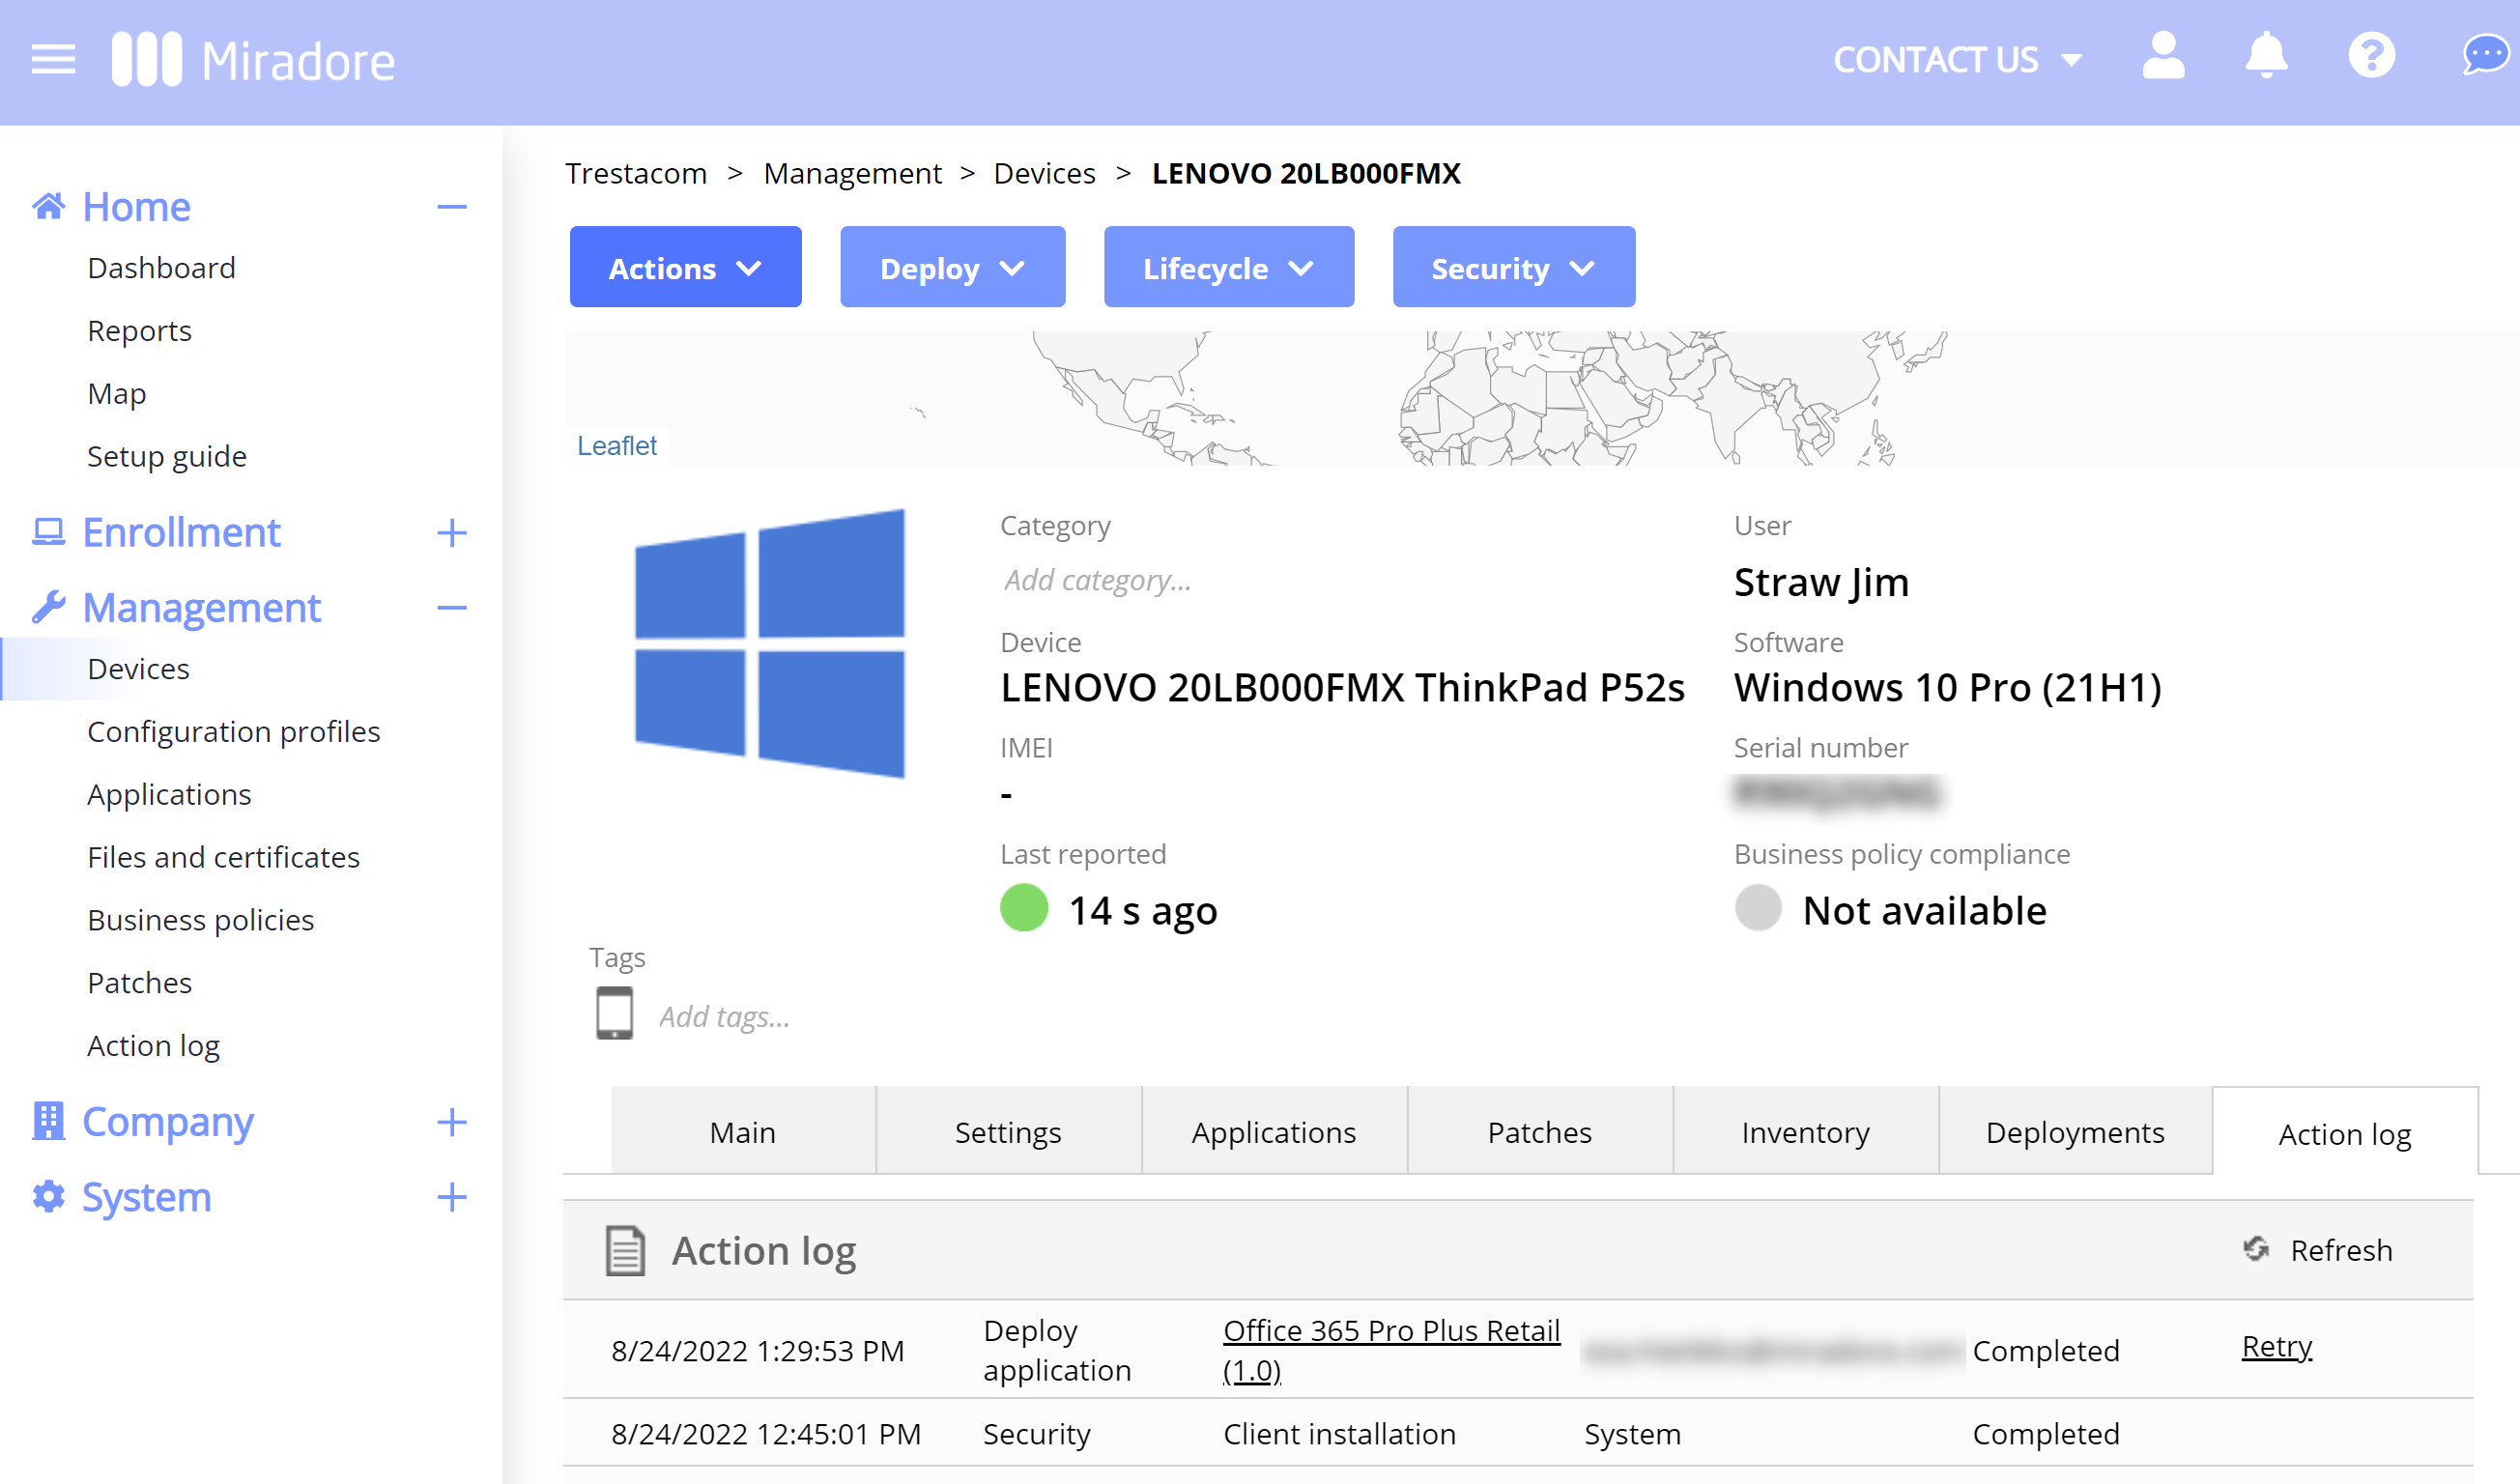 Follow-up Microsoft 365 application deployment from the Action log in Miradore